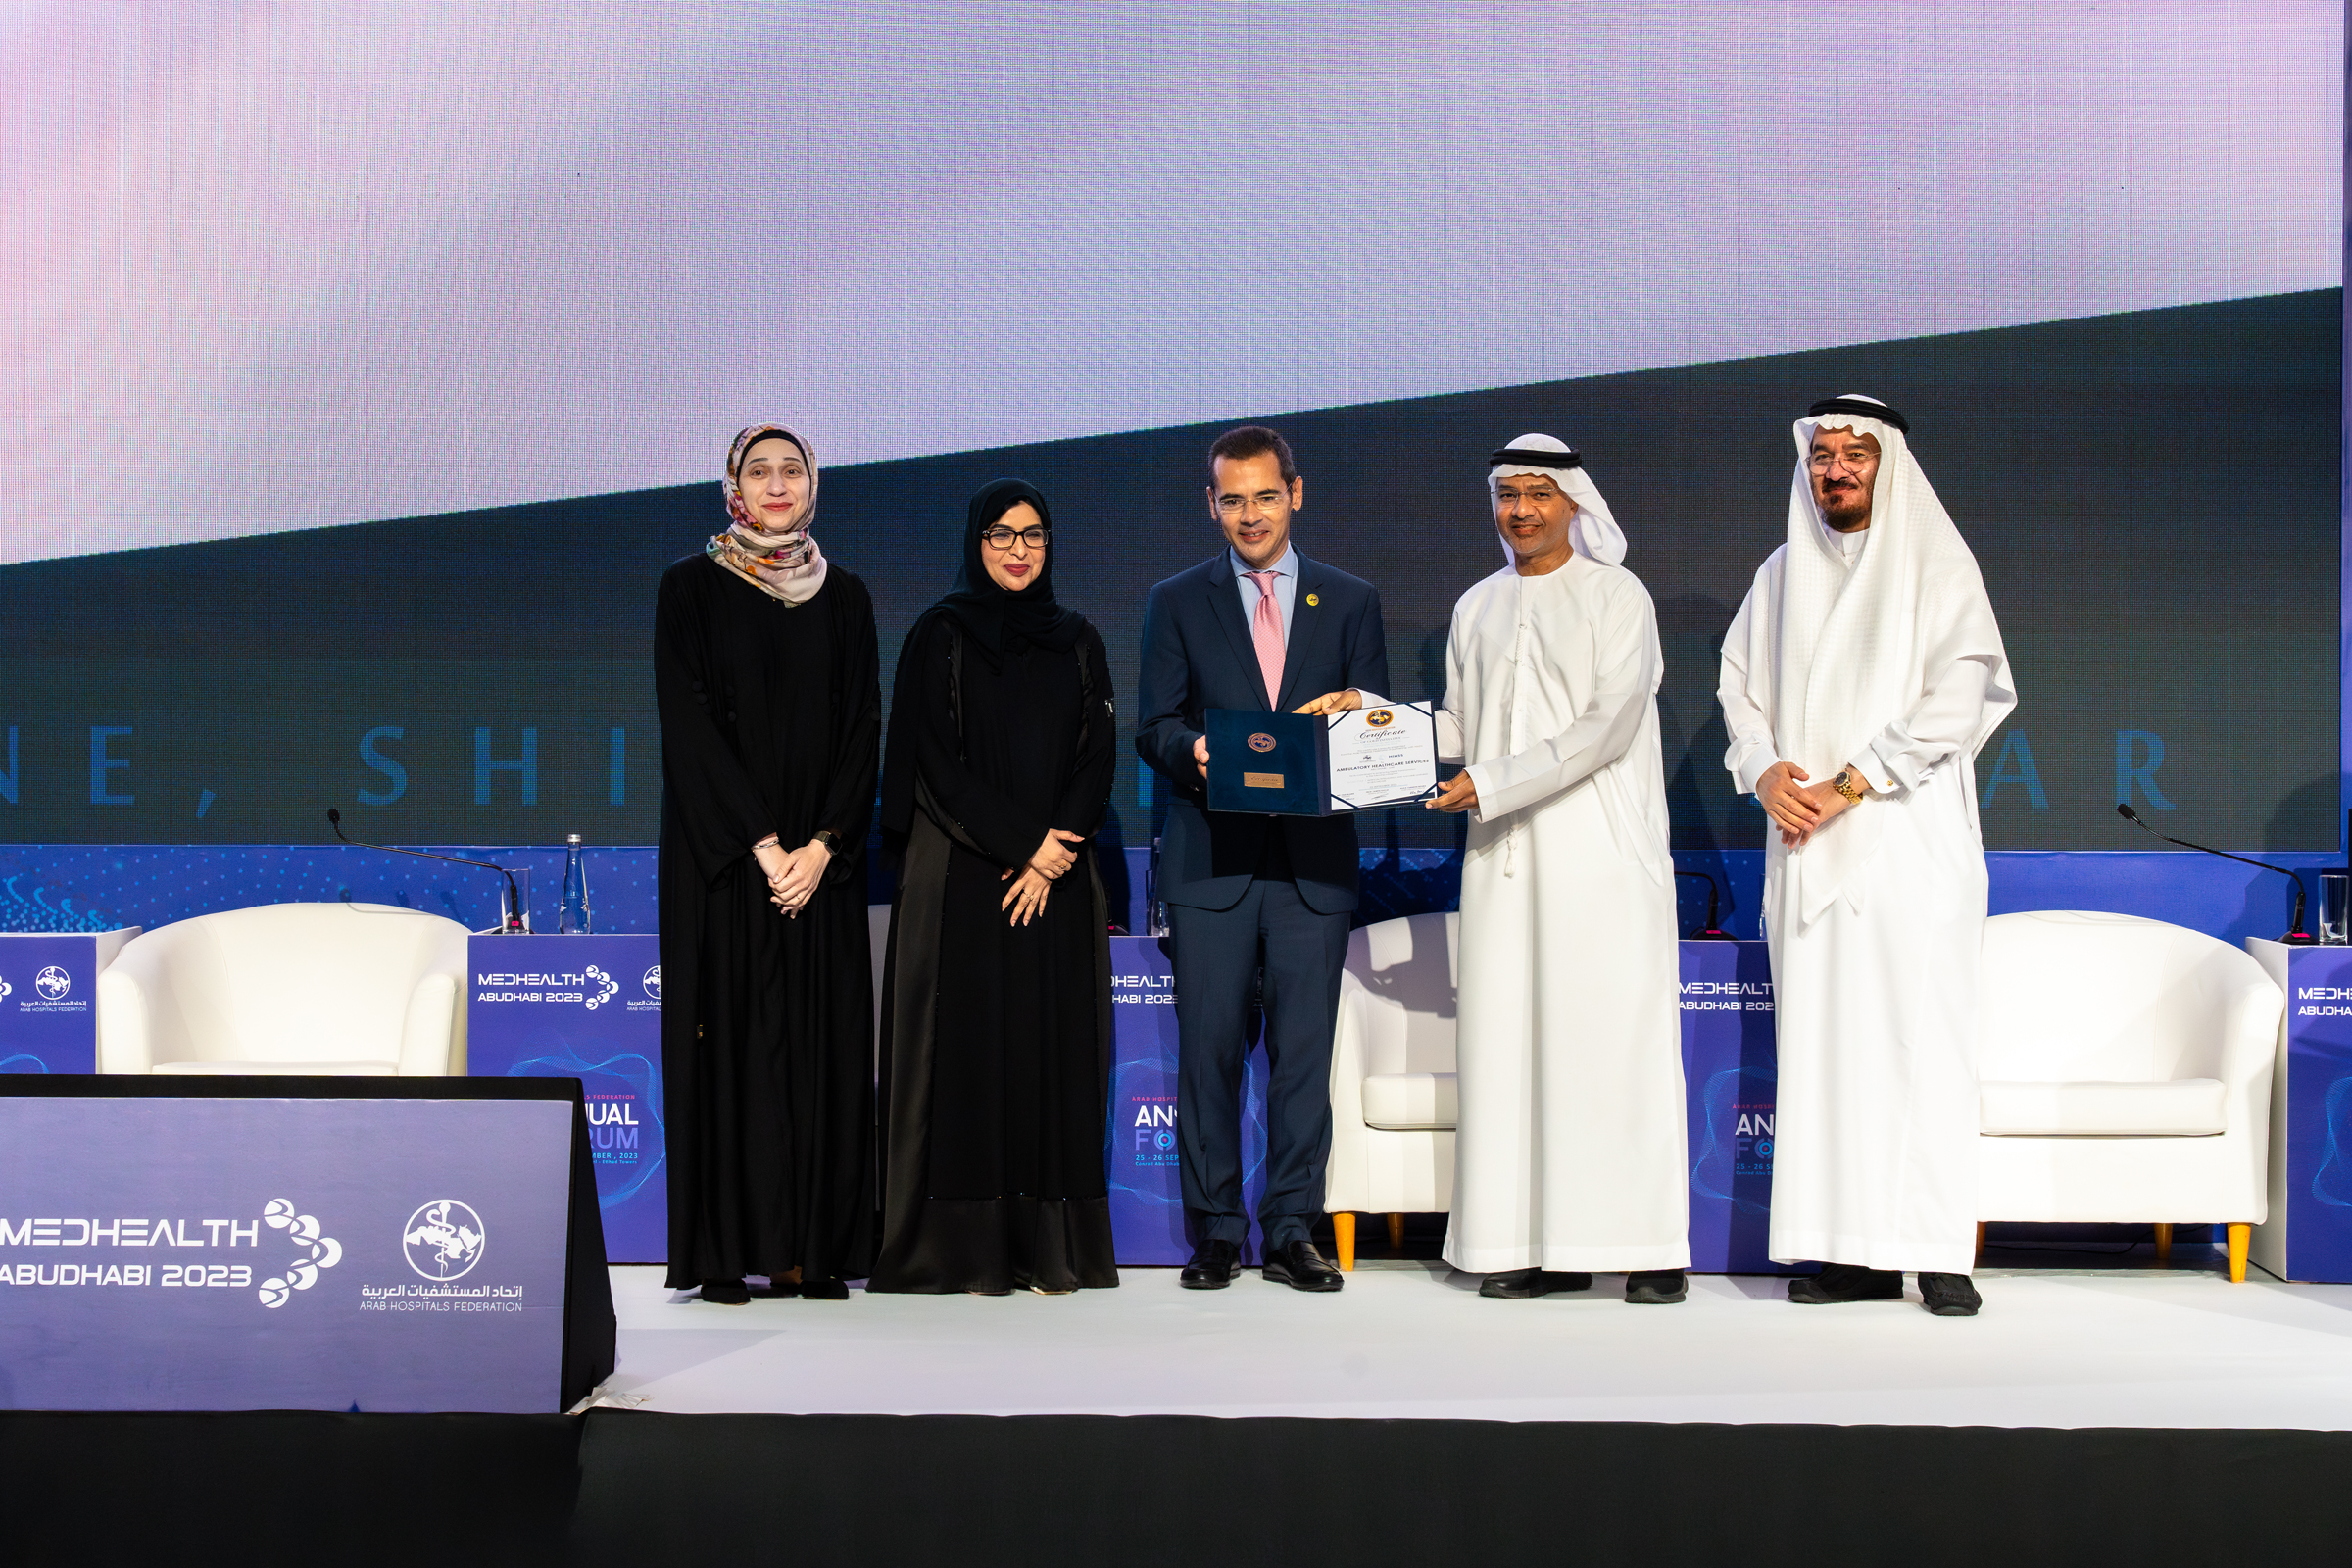 PureHealth’s AHS Subsidiary Awarded Gold Certificate by Arab Hospitals Federation